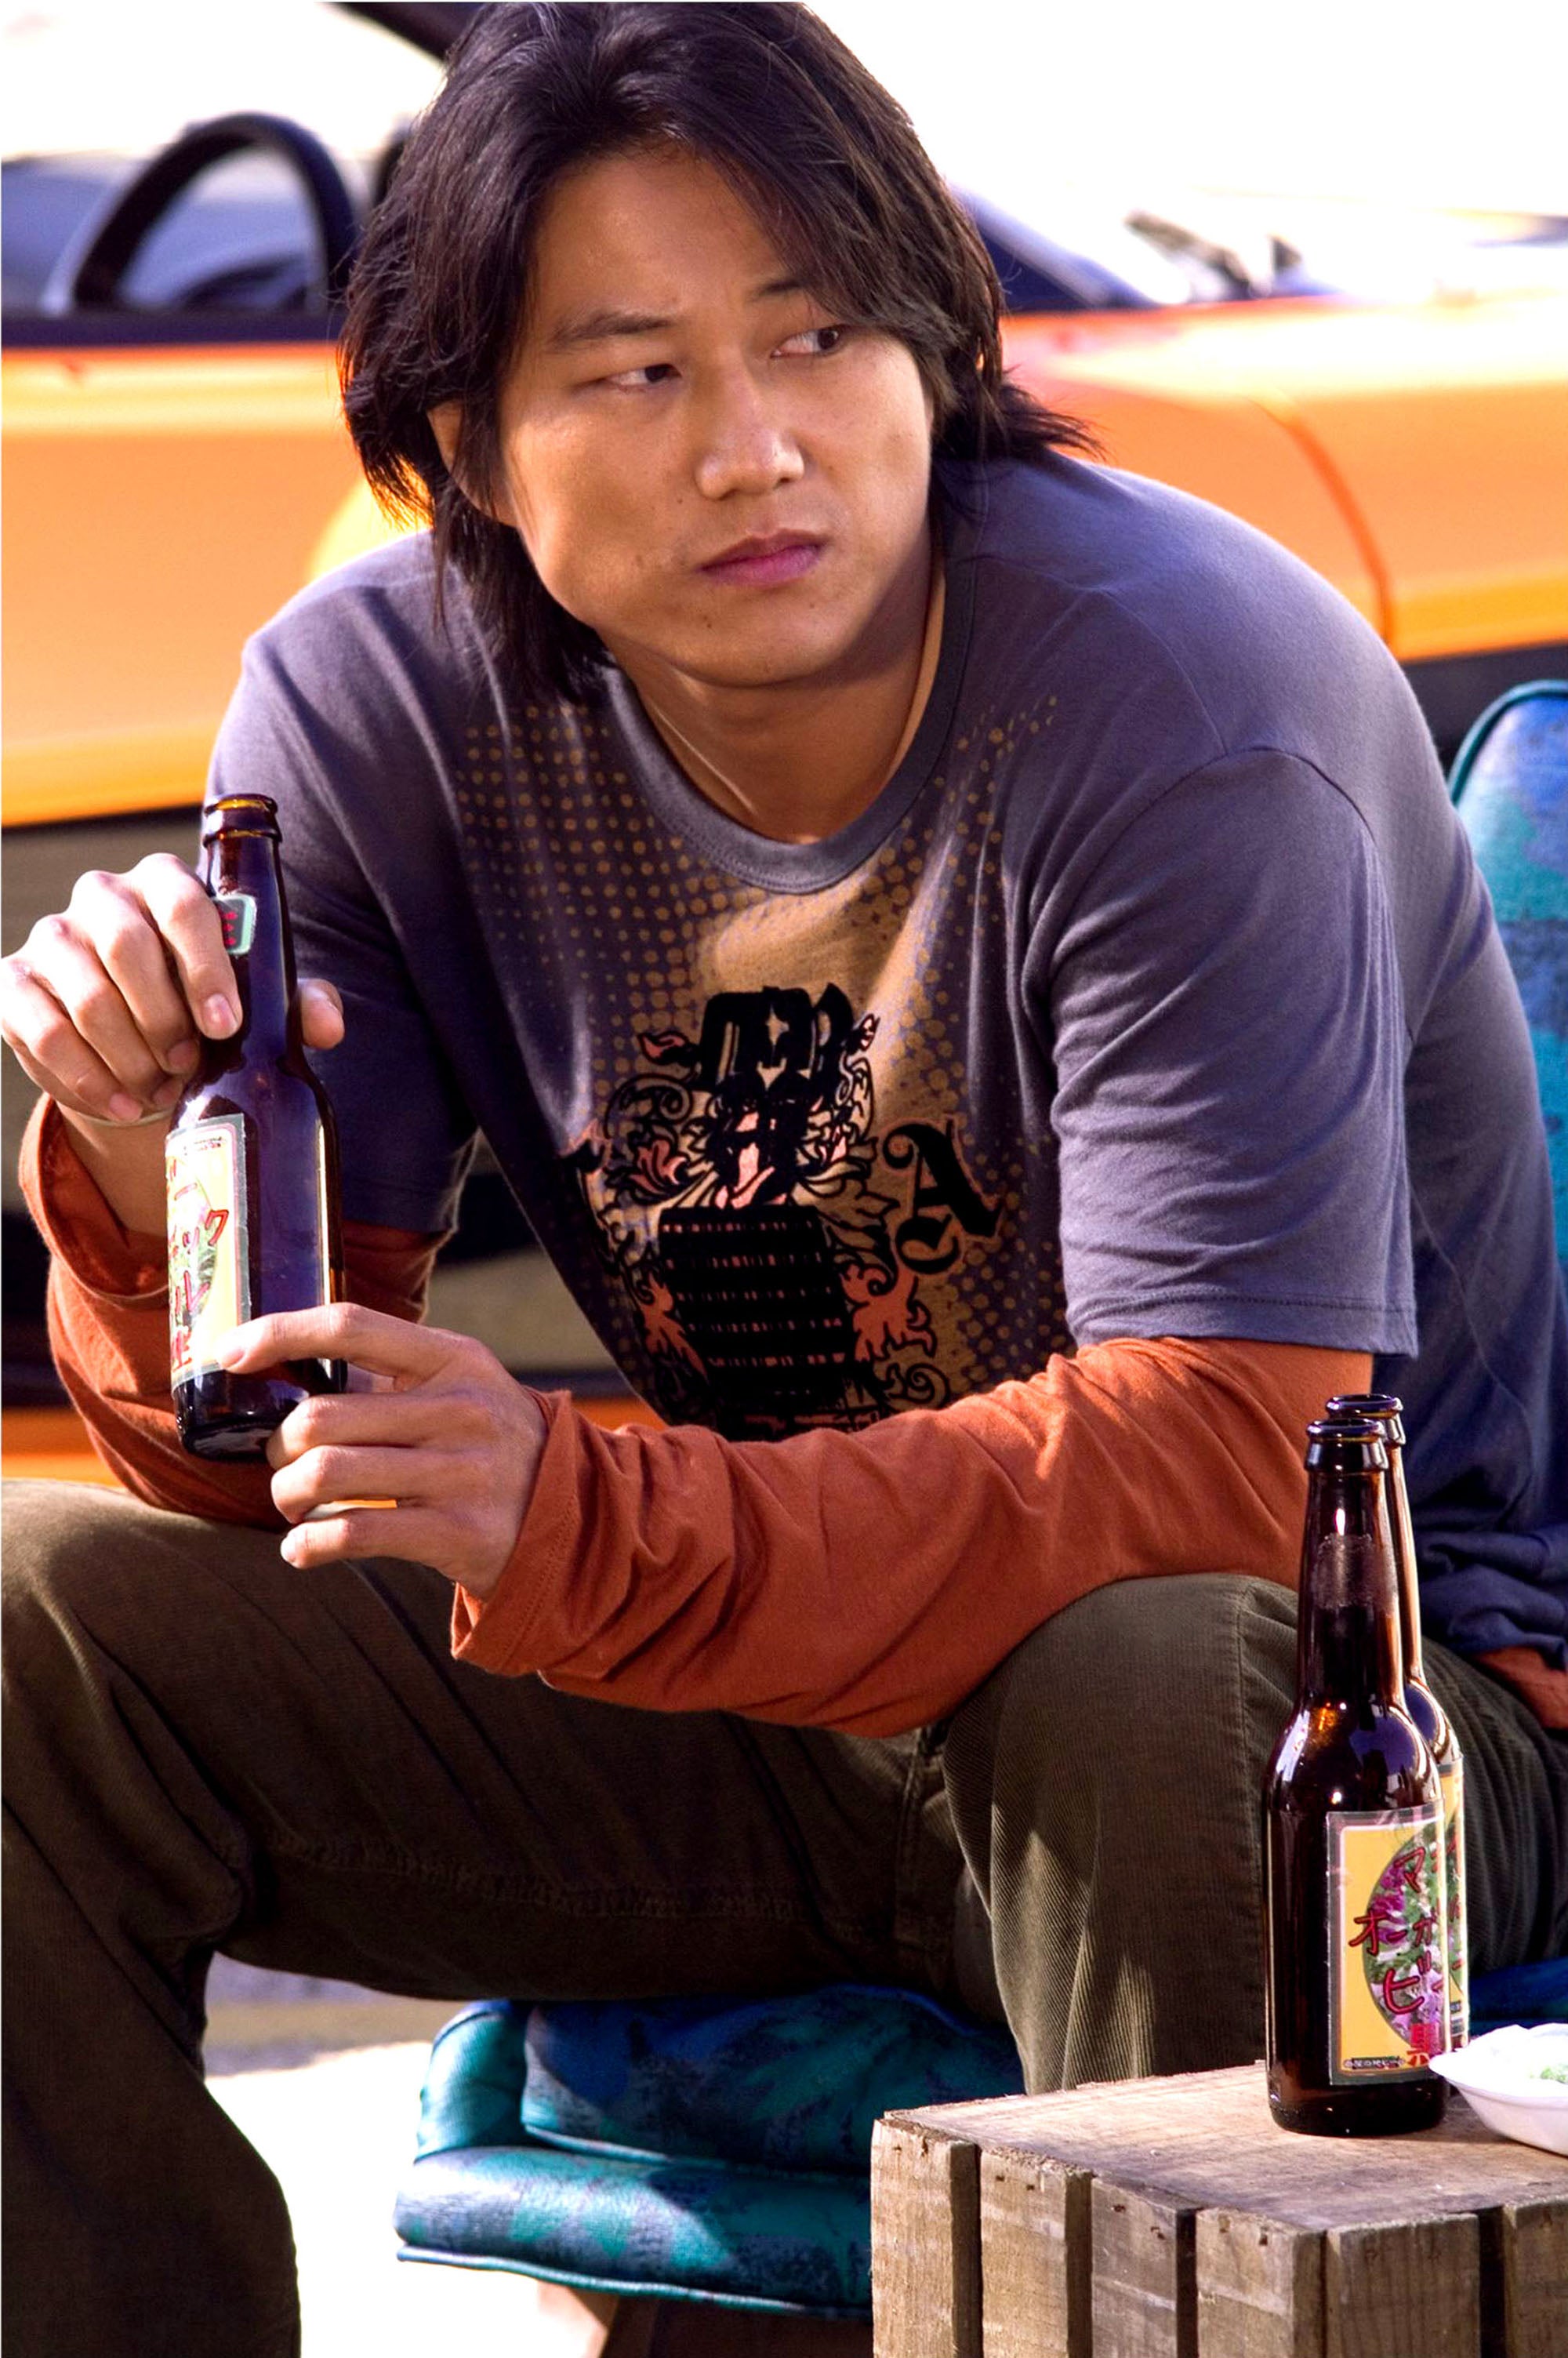 Sung Kang takes some time away from the action in ‘Tokyo Drift’